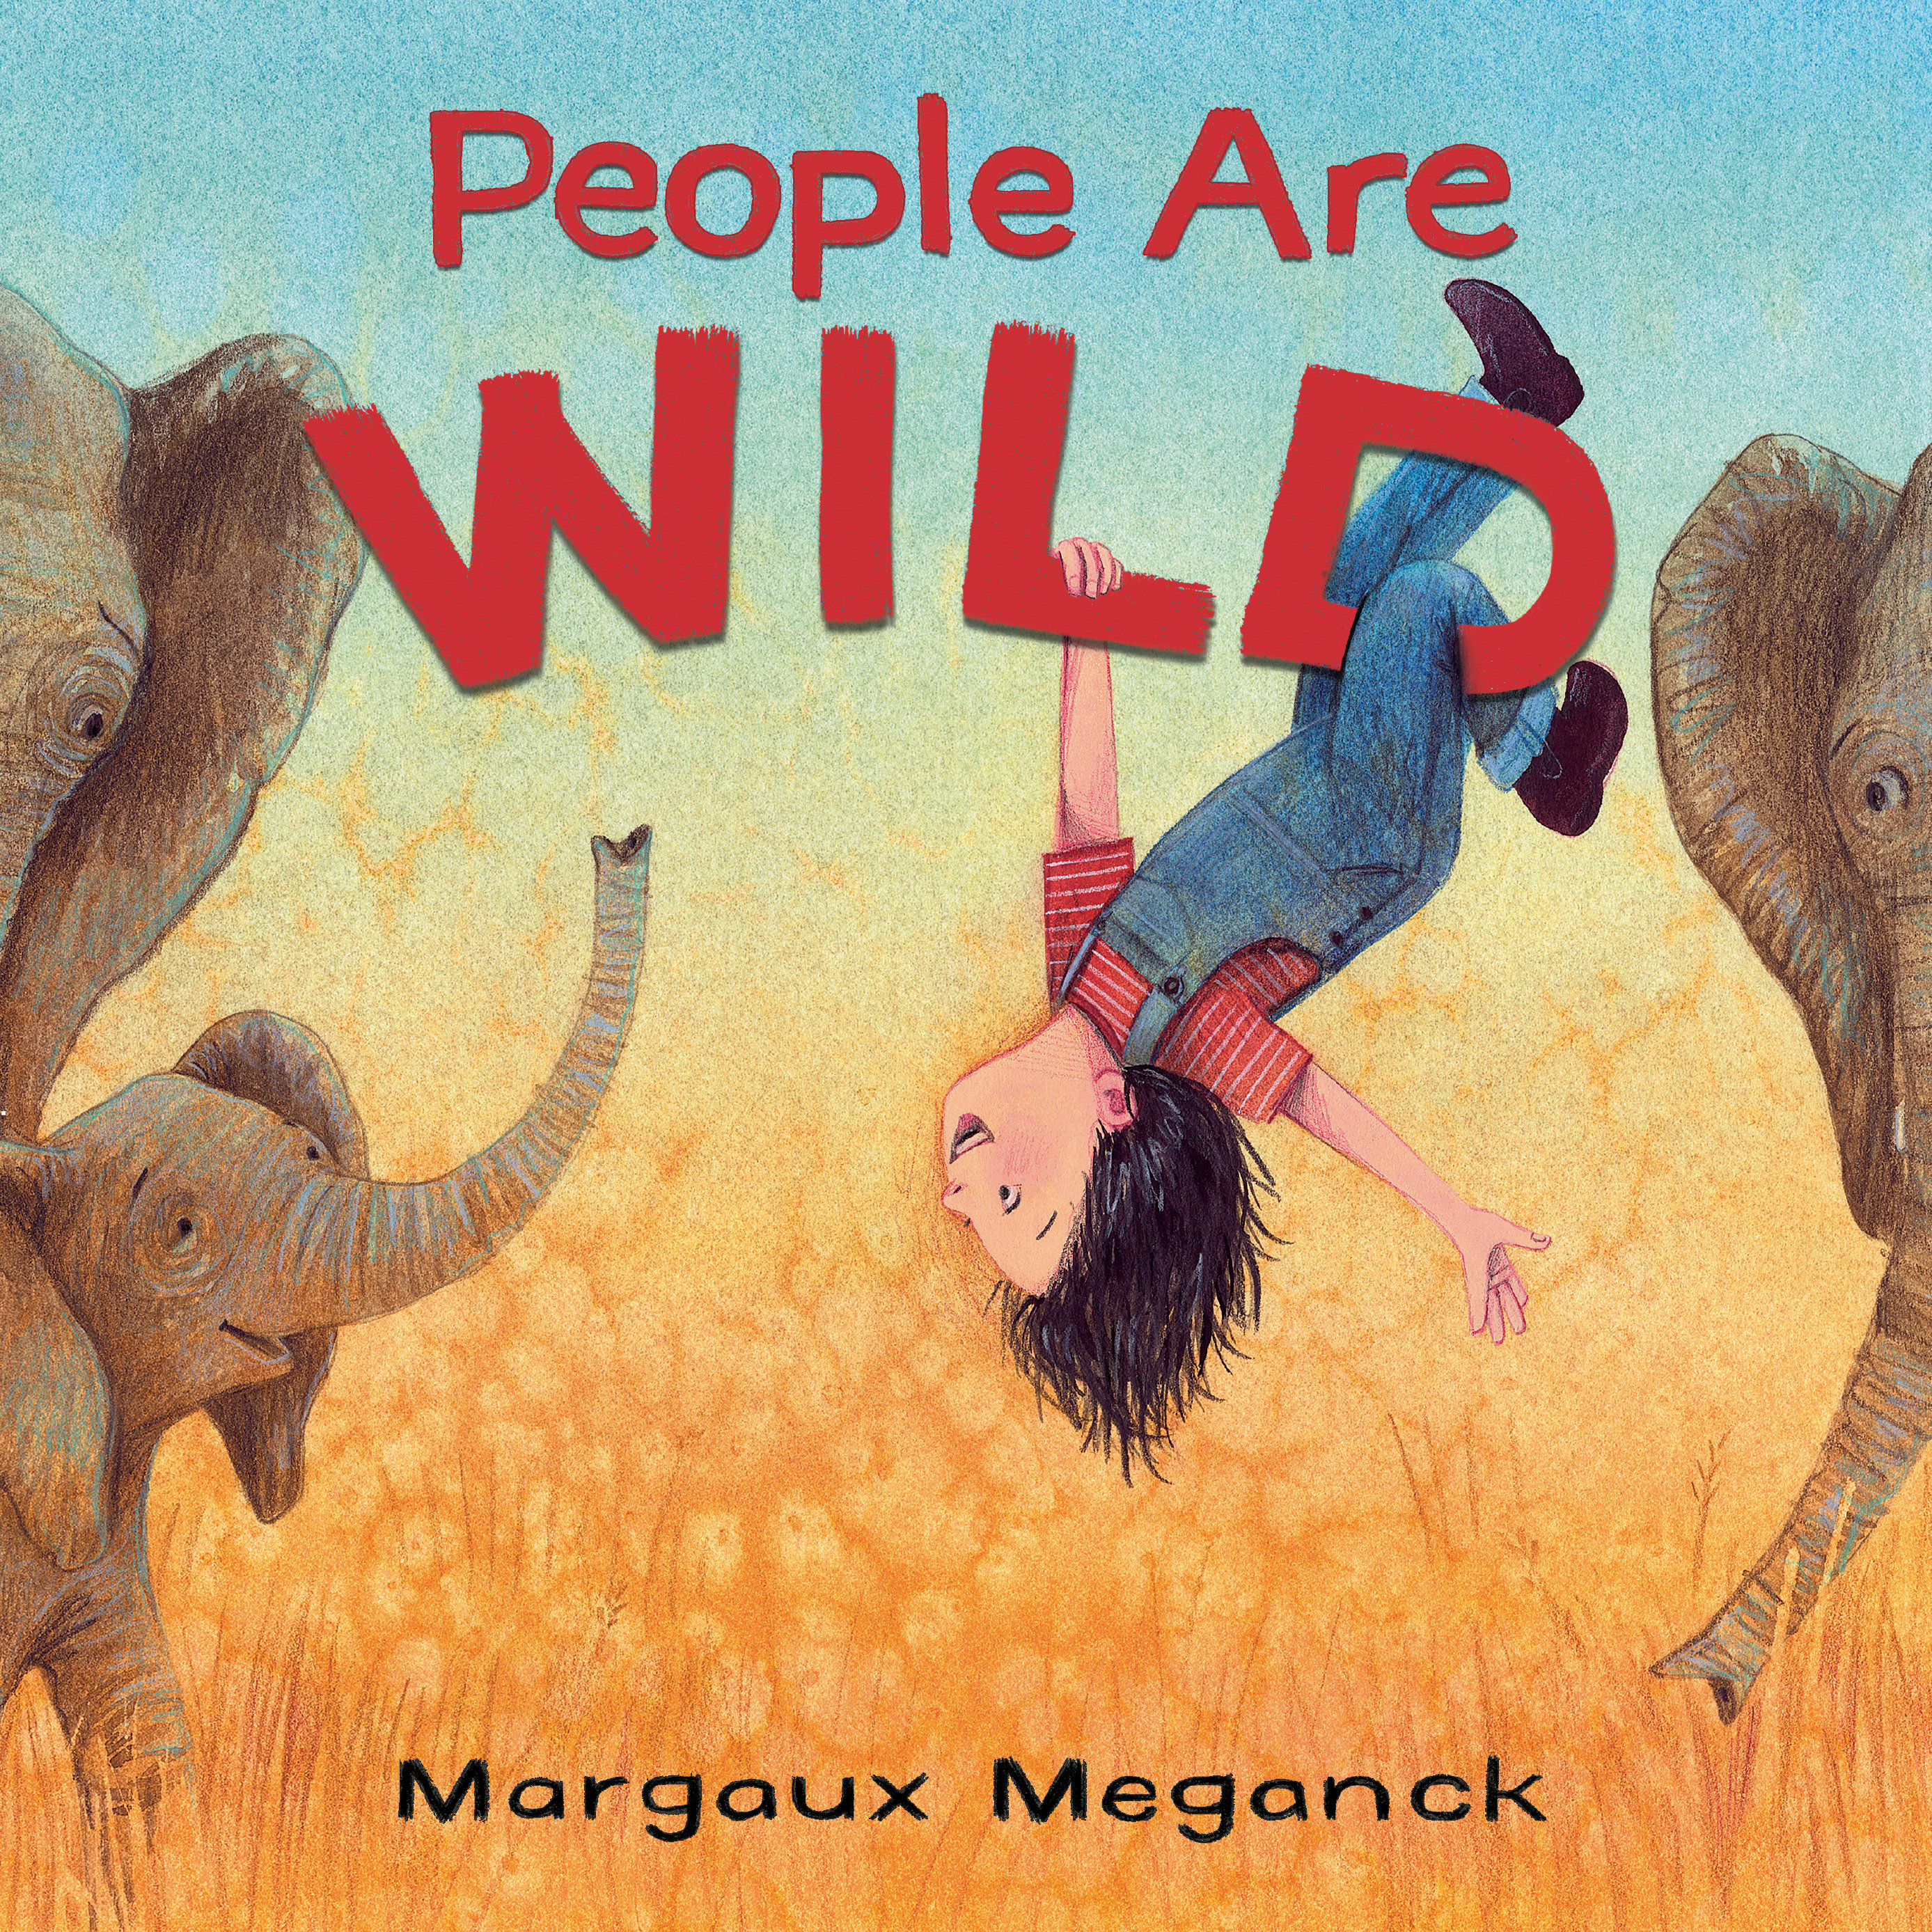 People Are Wild (Hardcover Book)